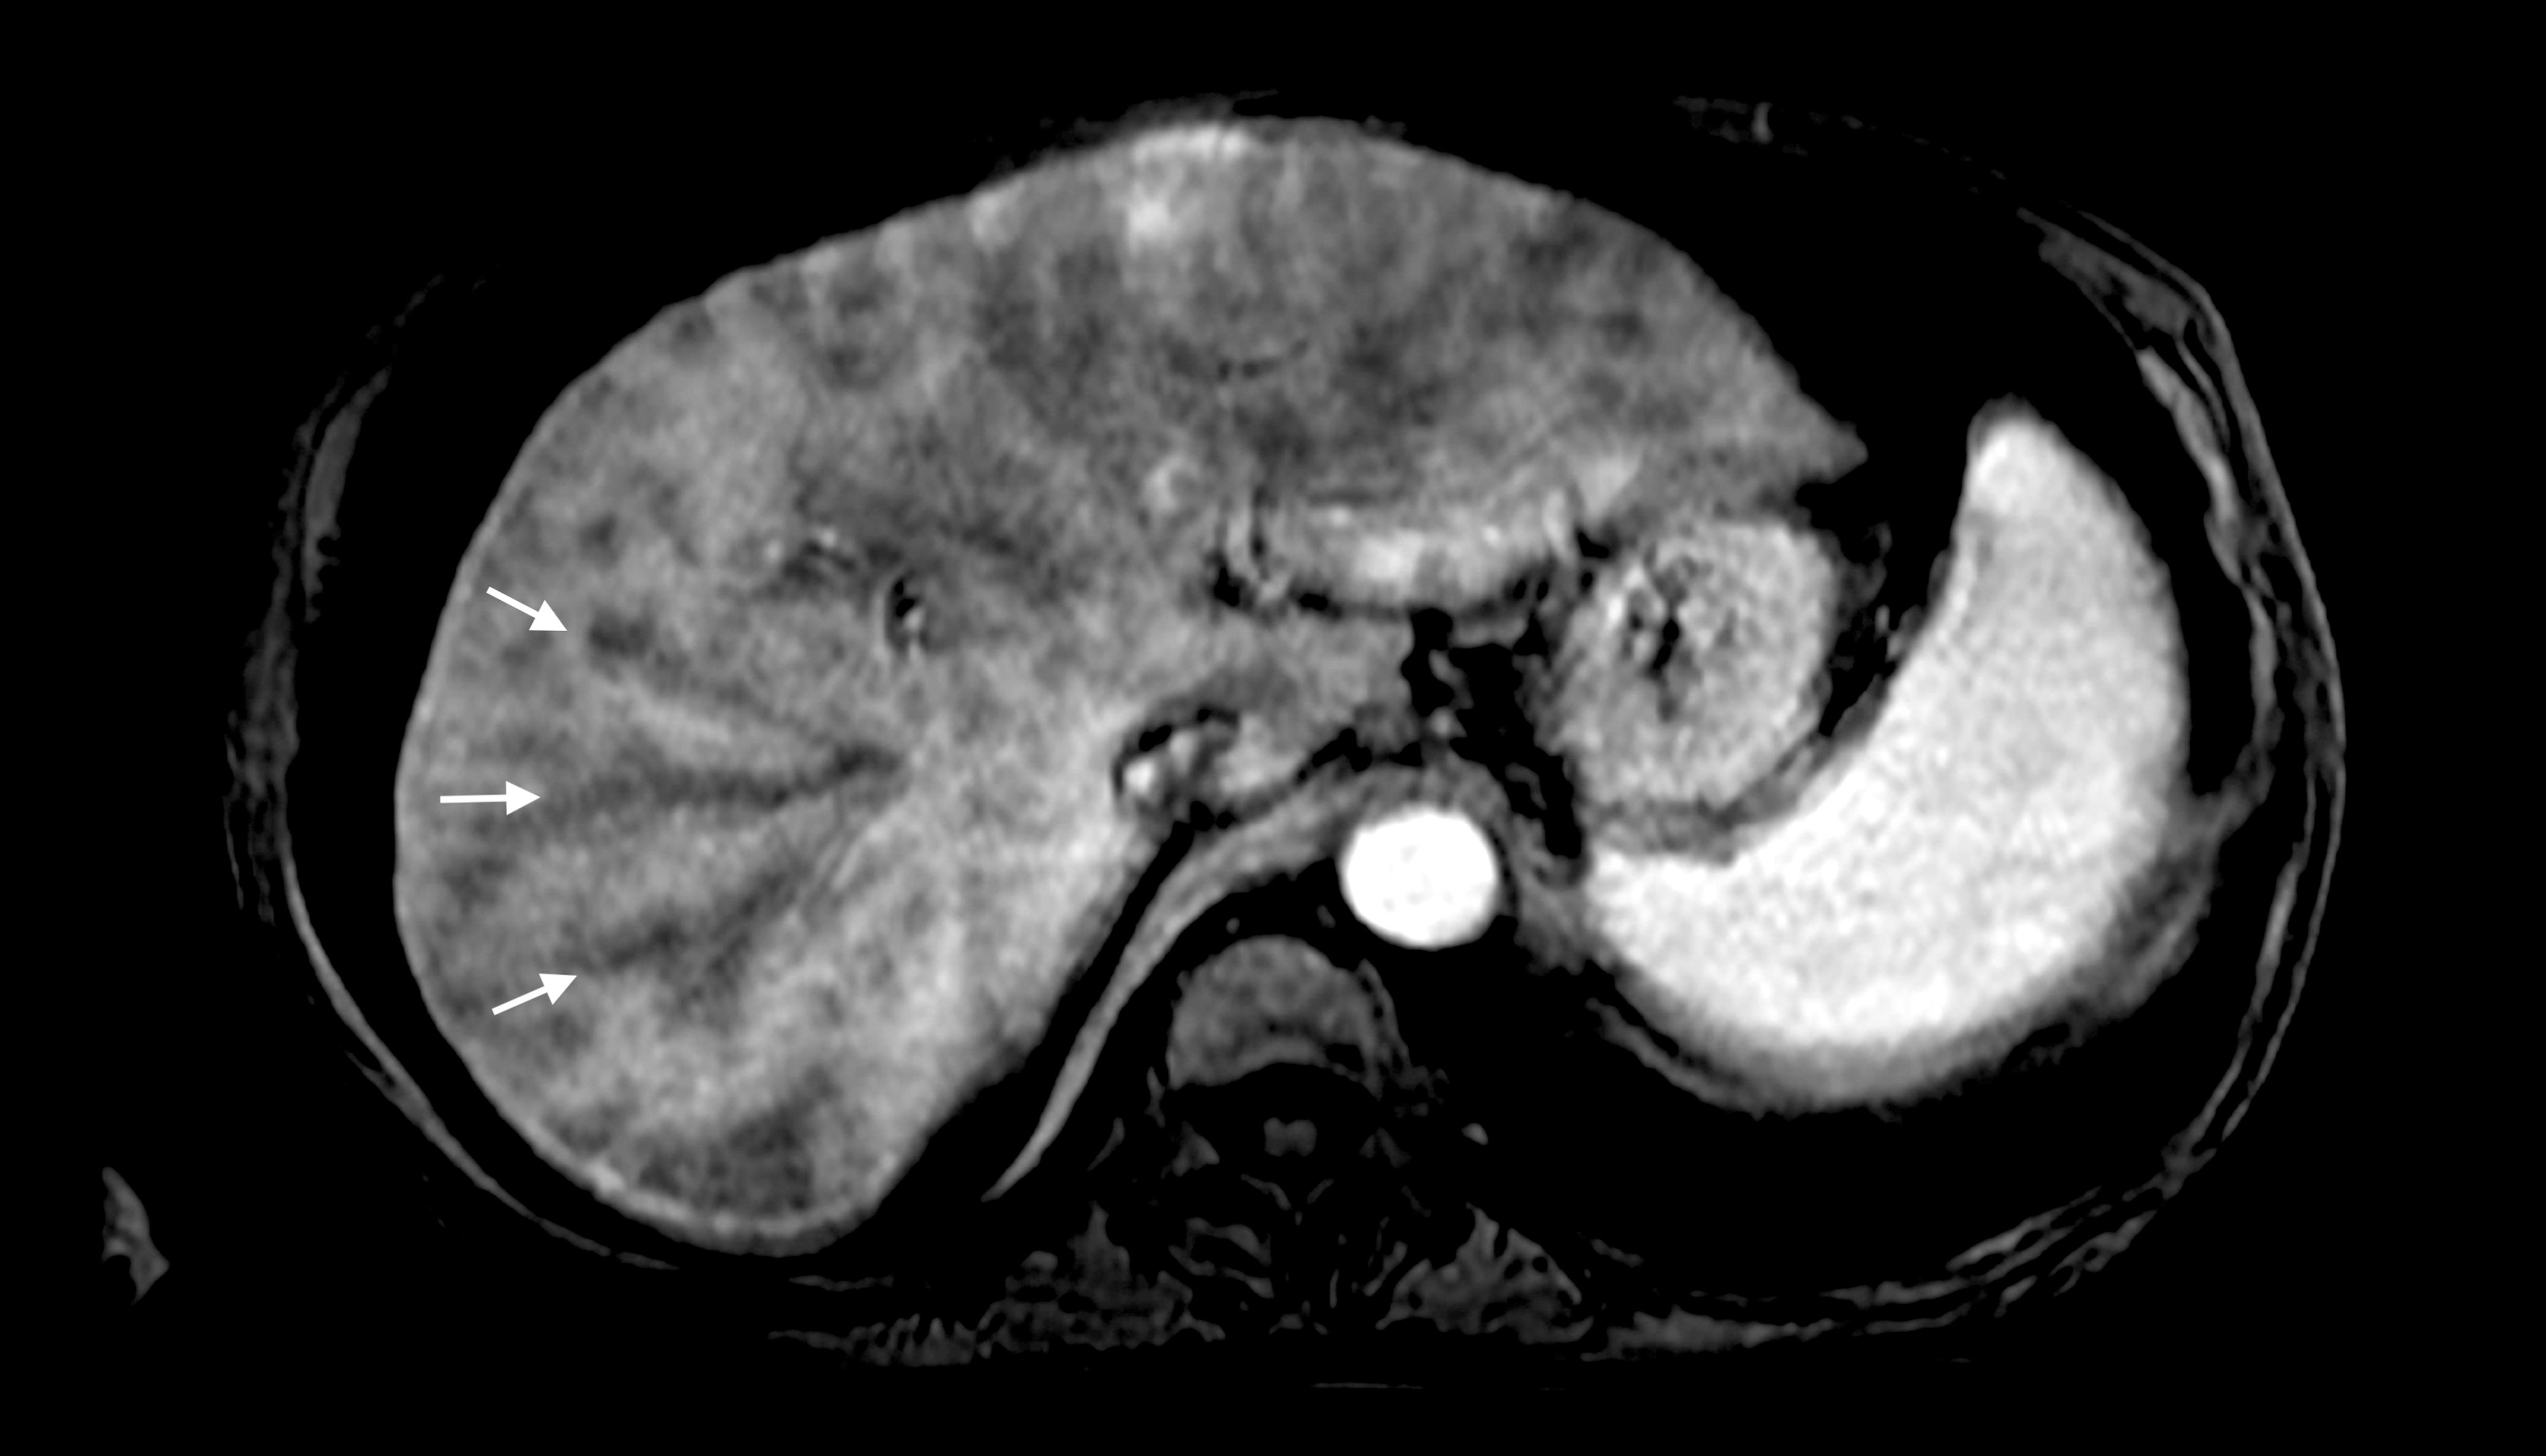 Contrast-enhanced arterial phase MRI of the liver demonstrating perivascular branching pattern (score of 5) identified by white arrow.